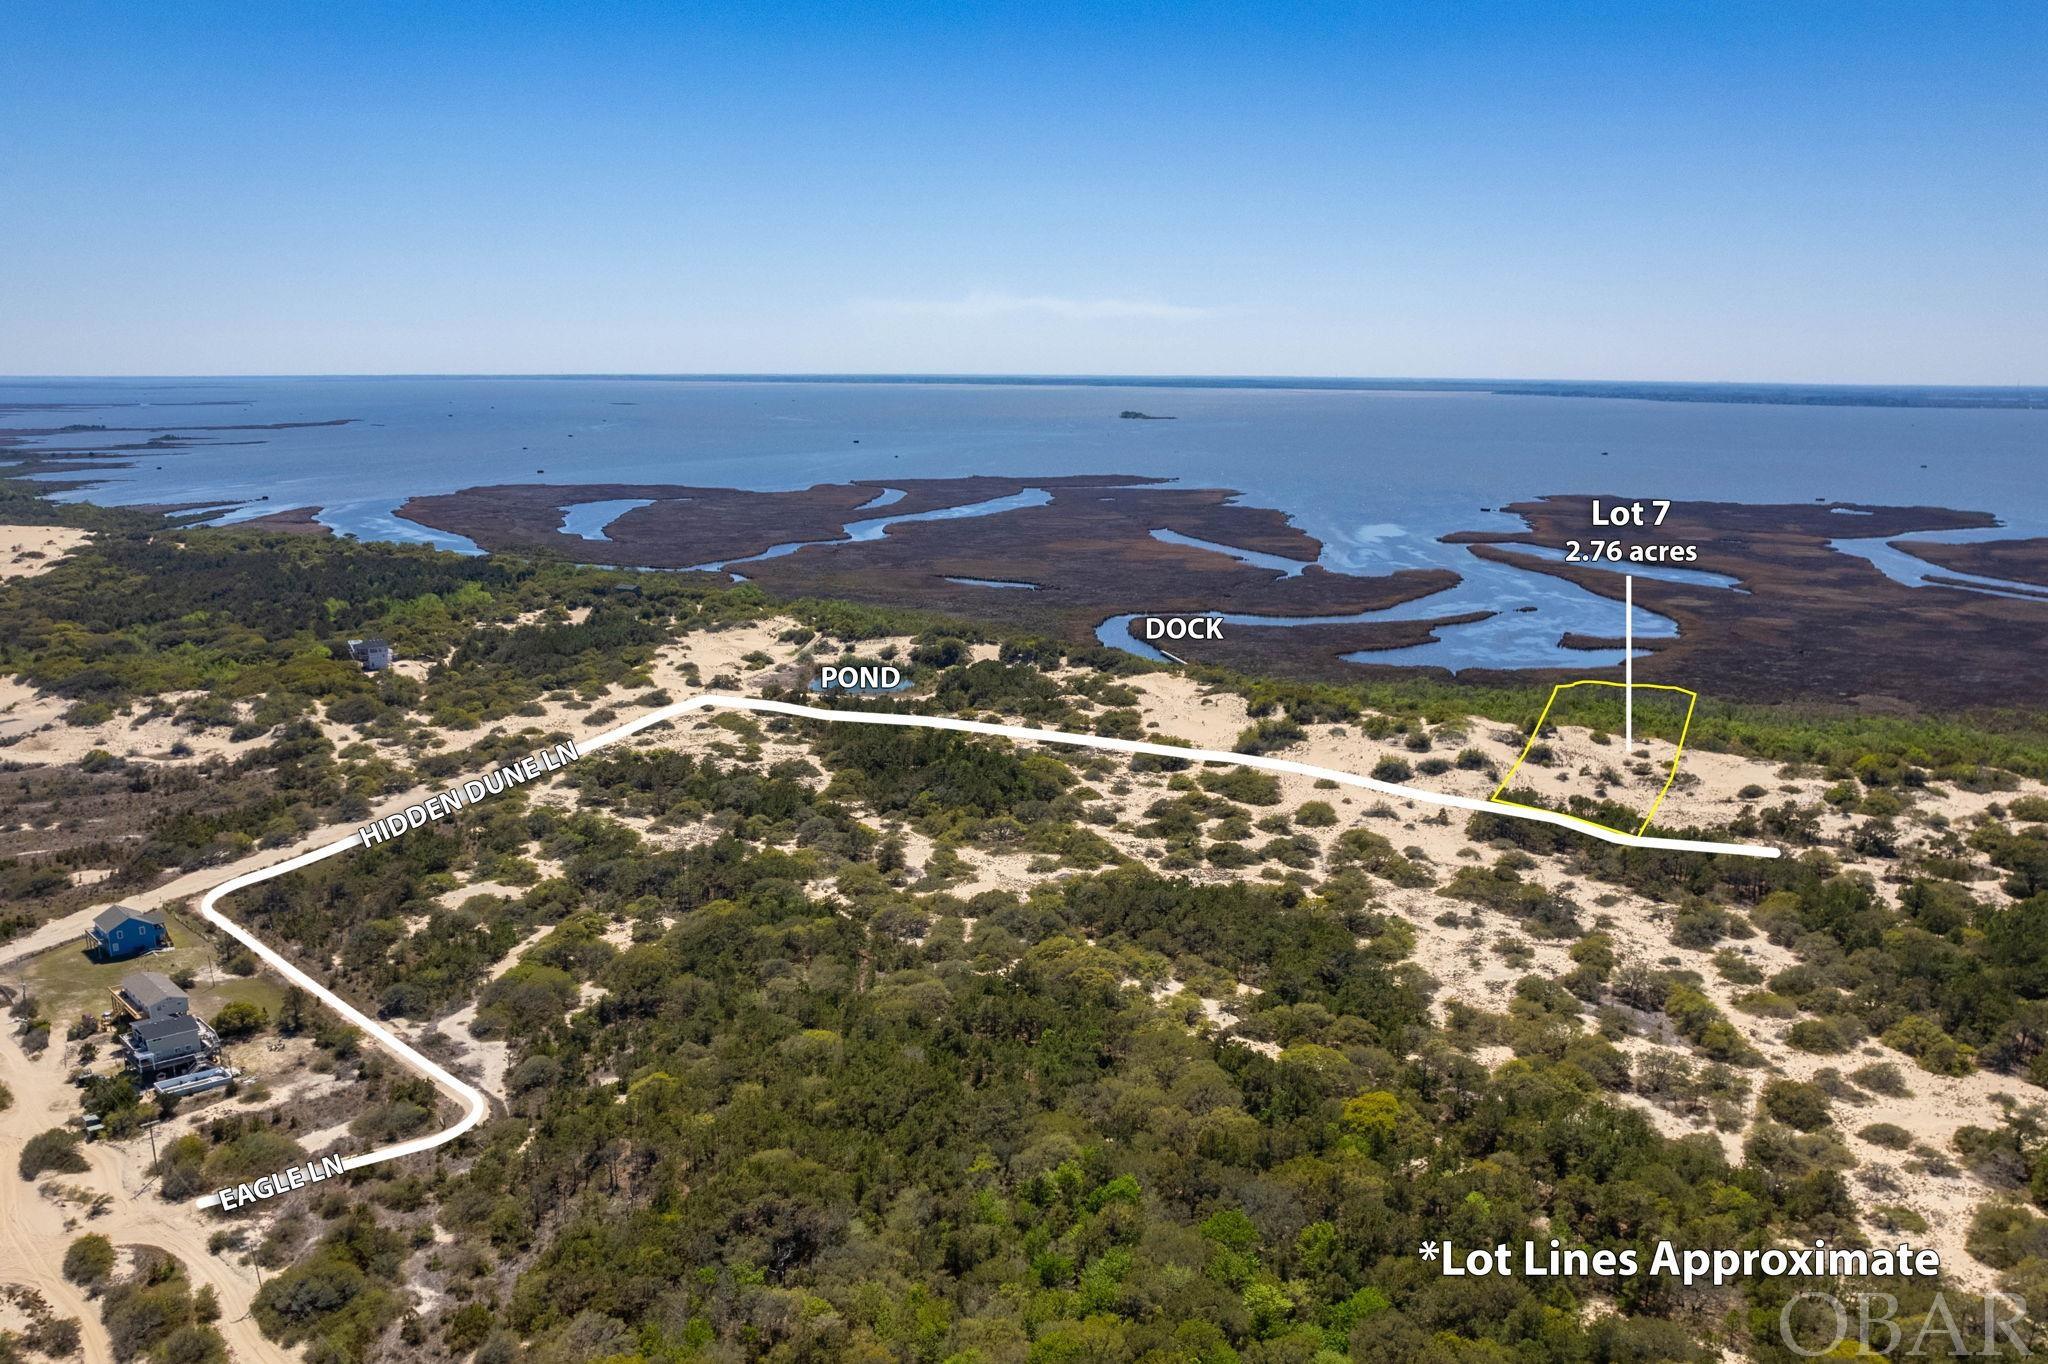 Discover the perfect opportunity to build your dream home on Lot 7 of the coveted Hidden Dunes Estate in the four-wheel-drive area of Corolla. This lot is wide and spacious, offering ample room for your new construction home.  Located in a private community, this lot offers easy access to the community dock for sound access, perfect for kayaking, boating, and more! You'll also enjoy stunning ocean to sound views from this location.  Imagine designing and building your own custom home on this homesite, perfectly tailored to your preferences and lifestyle. This location offers a peaceful retreat from the hustle and bustle of everyday life, with easy access to community amenities and the beach just a short distance away.  Don't miss out on this unique opportunity to own a piece of paradise in one of the most desirable areas of Corolla. Schedule a tour of this exceptional property and start envisioning your dream home in the tranquil surroundings of Hidden Dunes Estate.